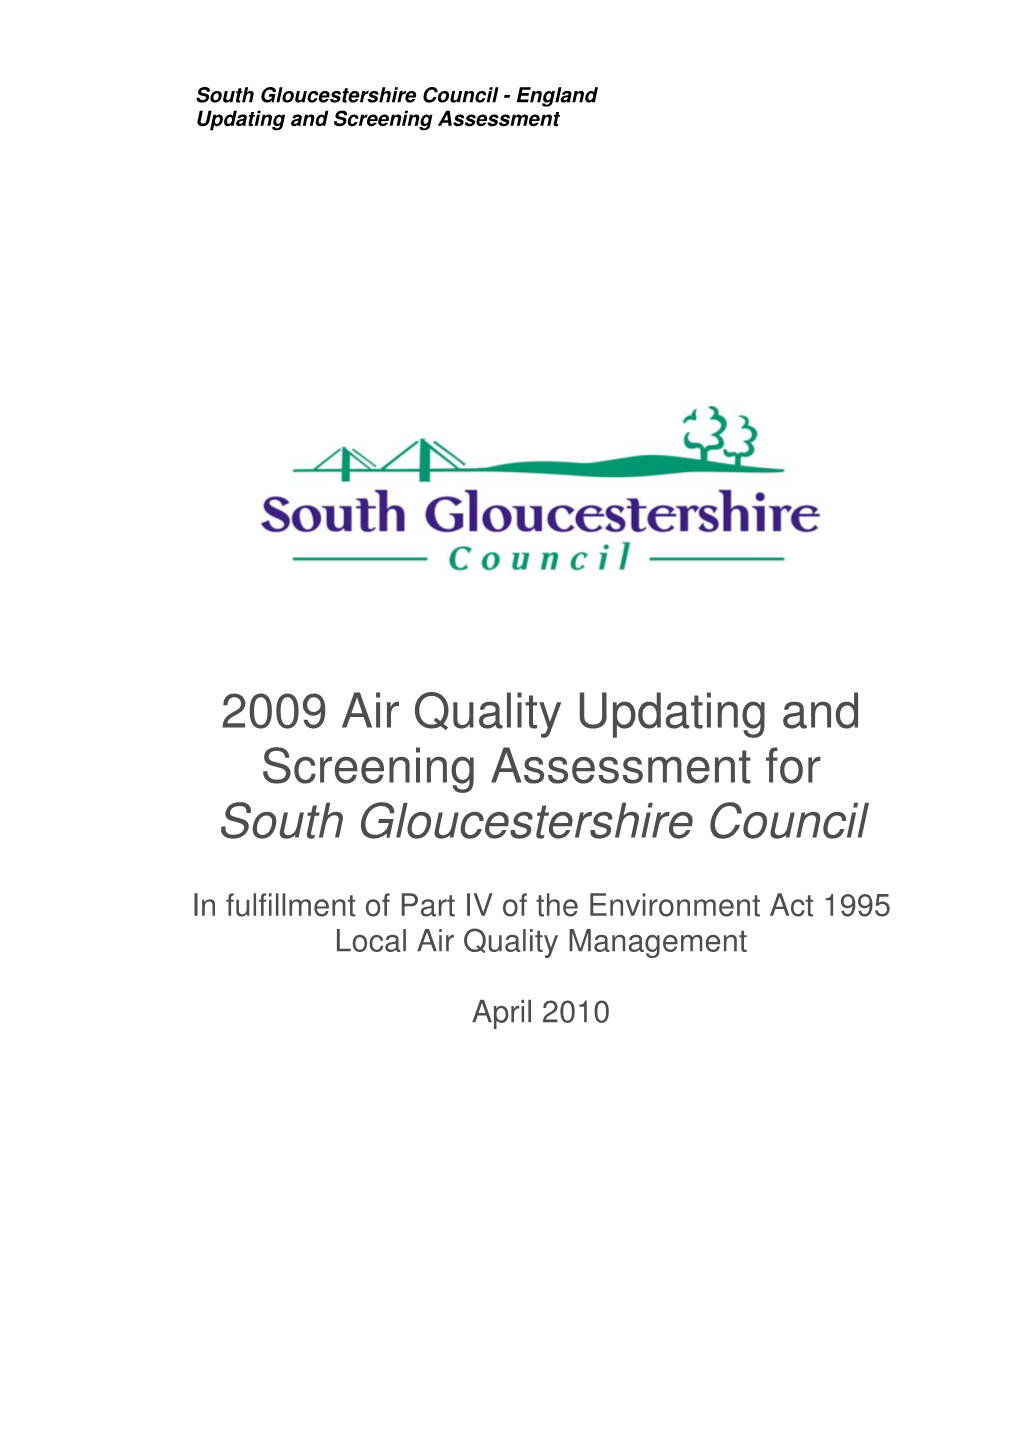 2009 Air Quality Updating and Screening Assessment for South Gloucestershire Council